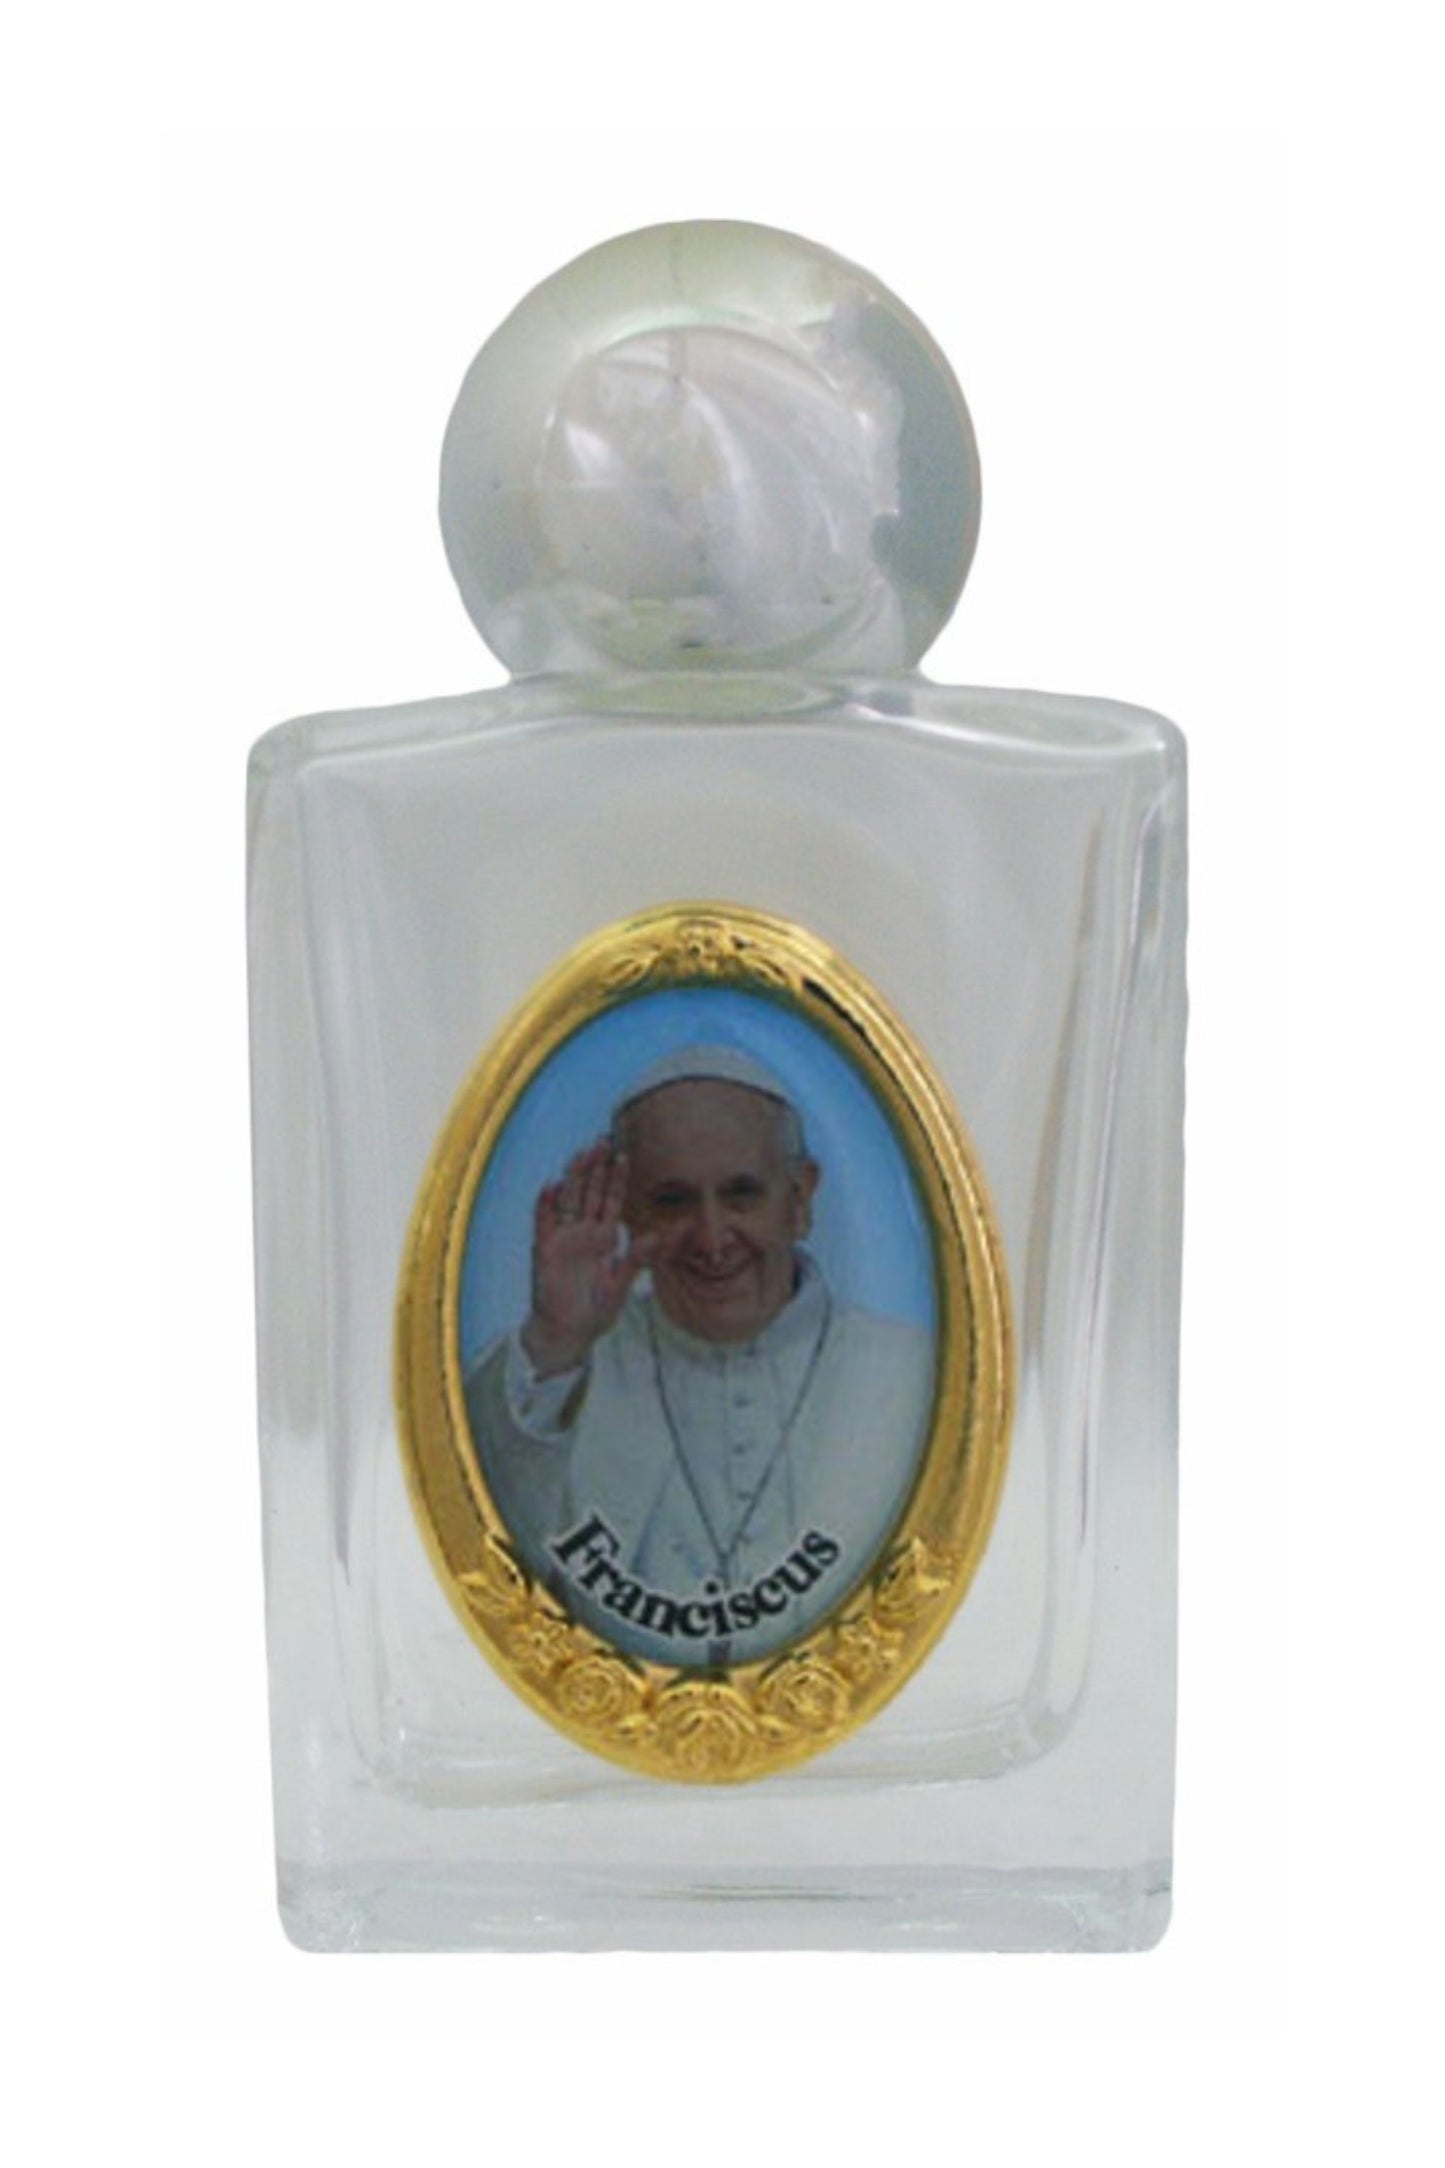 WB11-POPEFRAN Pope Francis Holy Water Bottle 1.75x2.25"